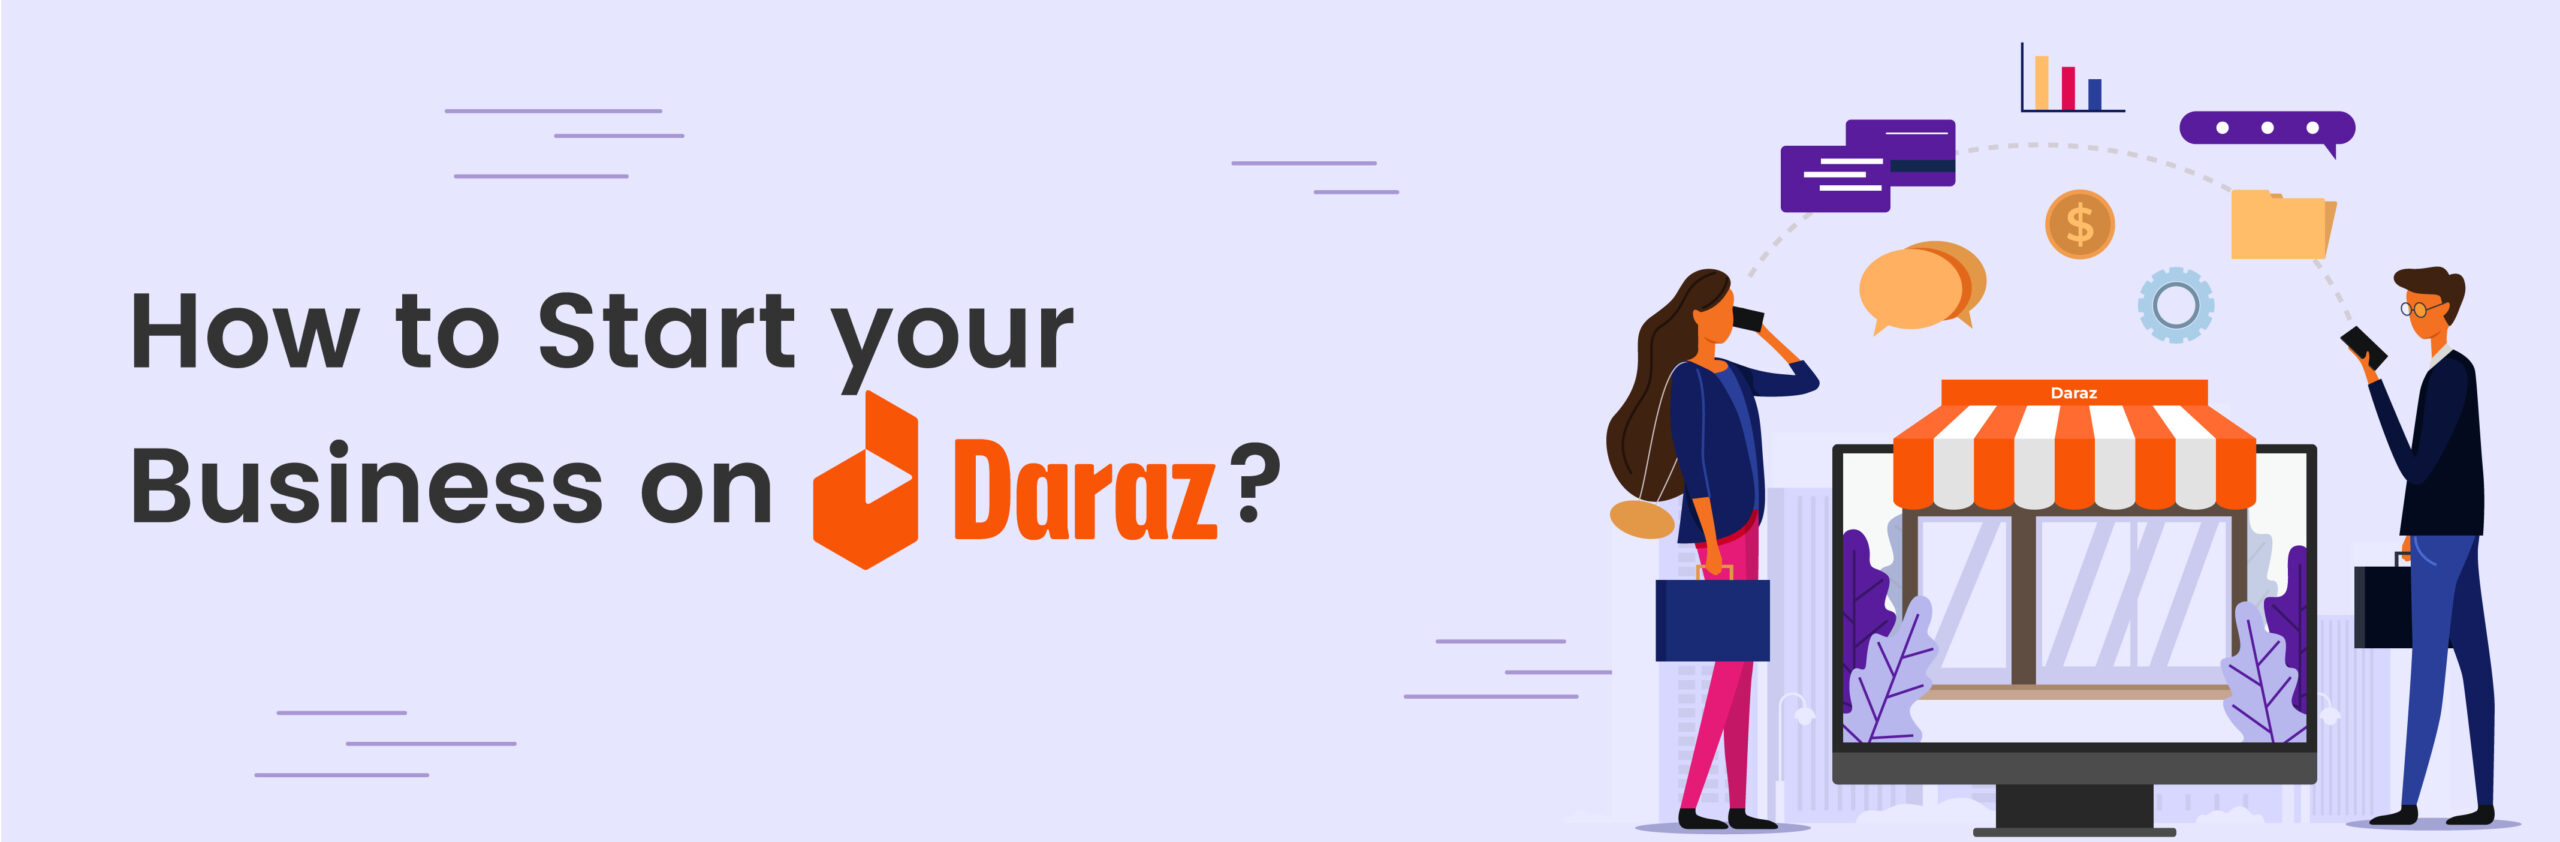 How to start your business on Daraz?